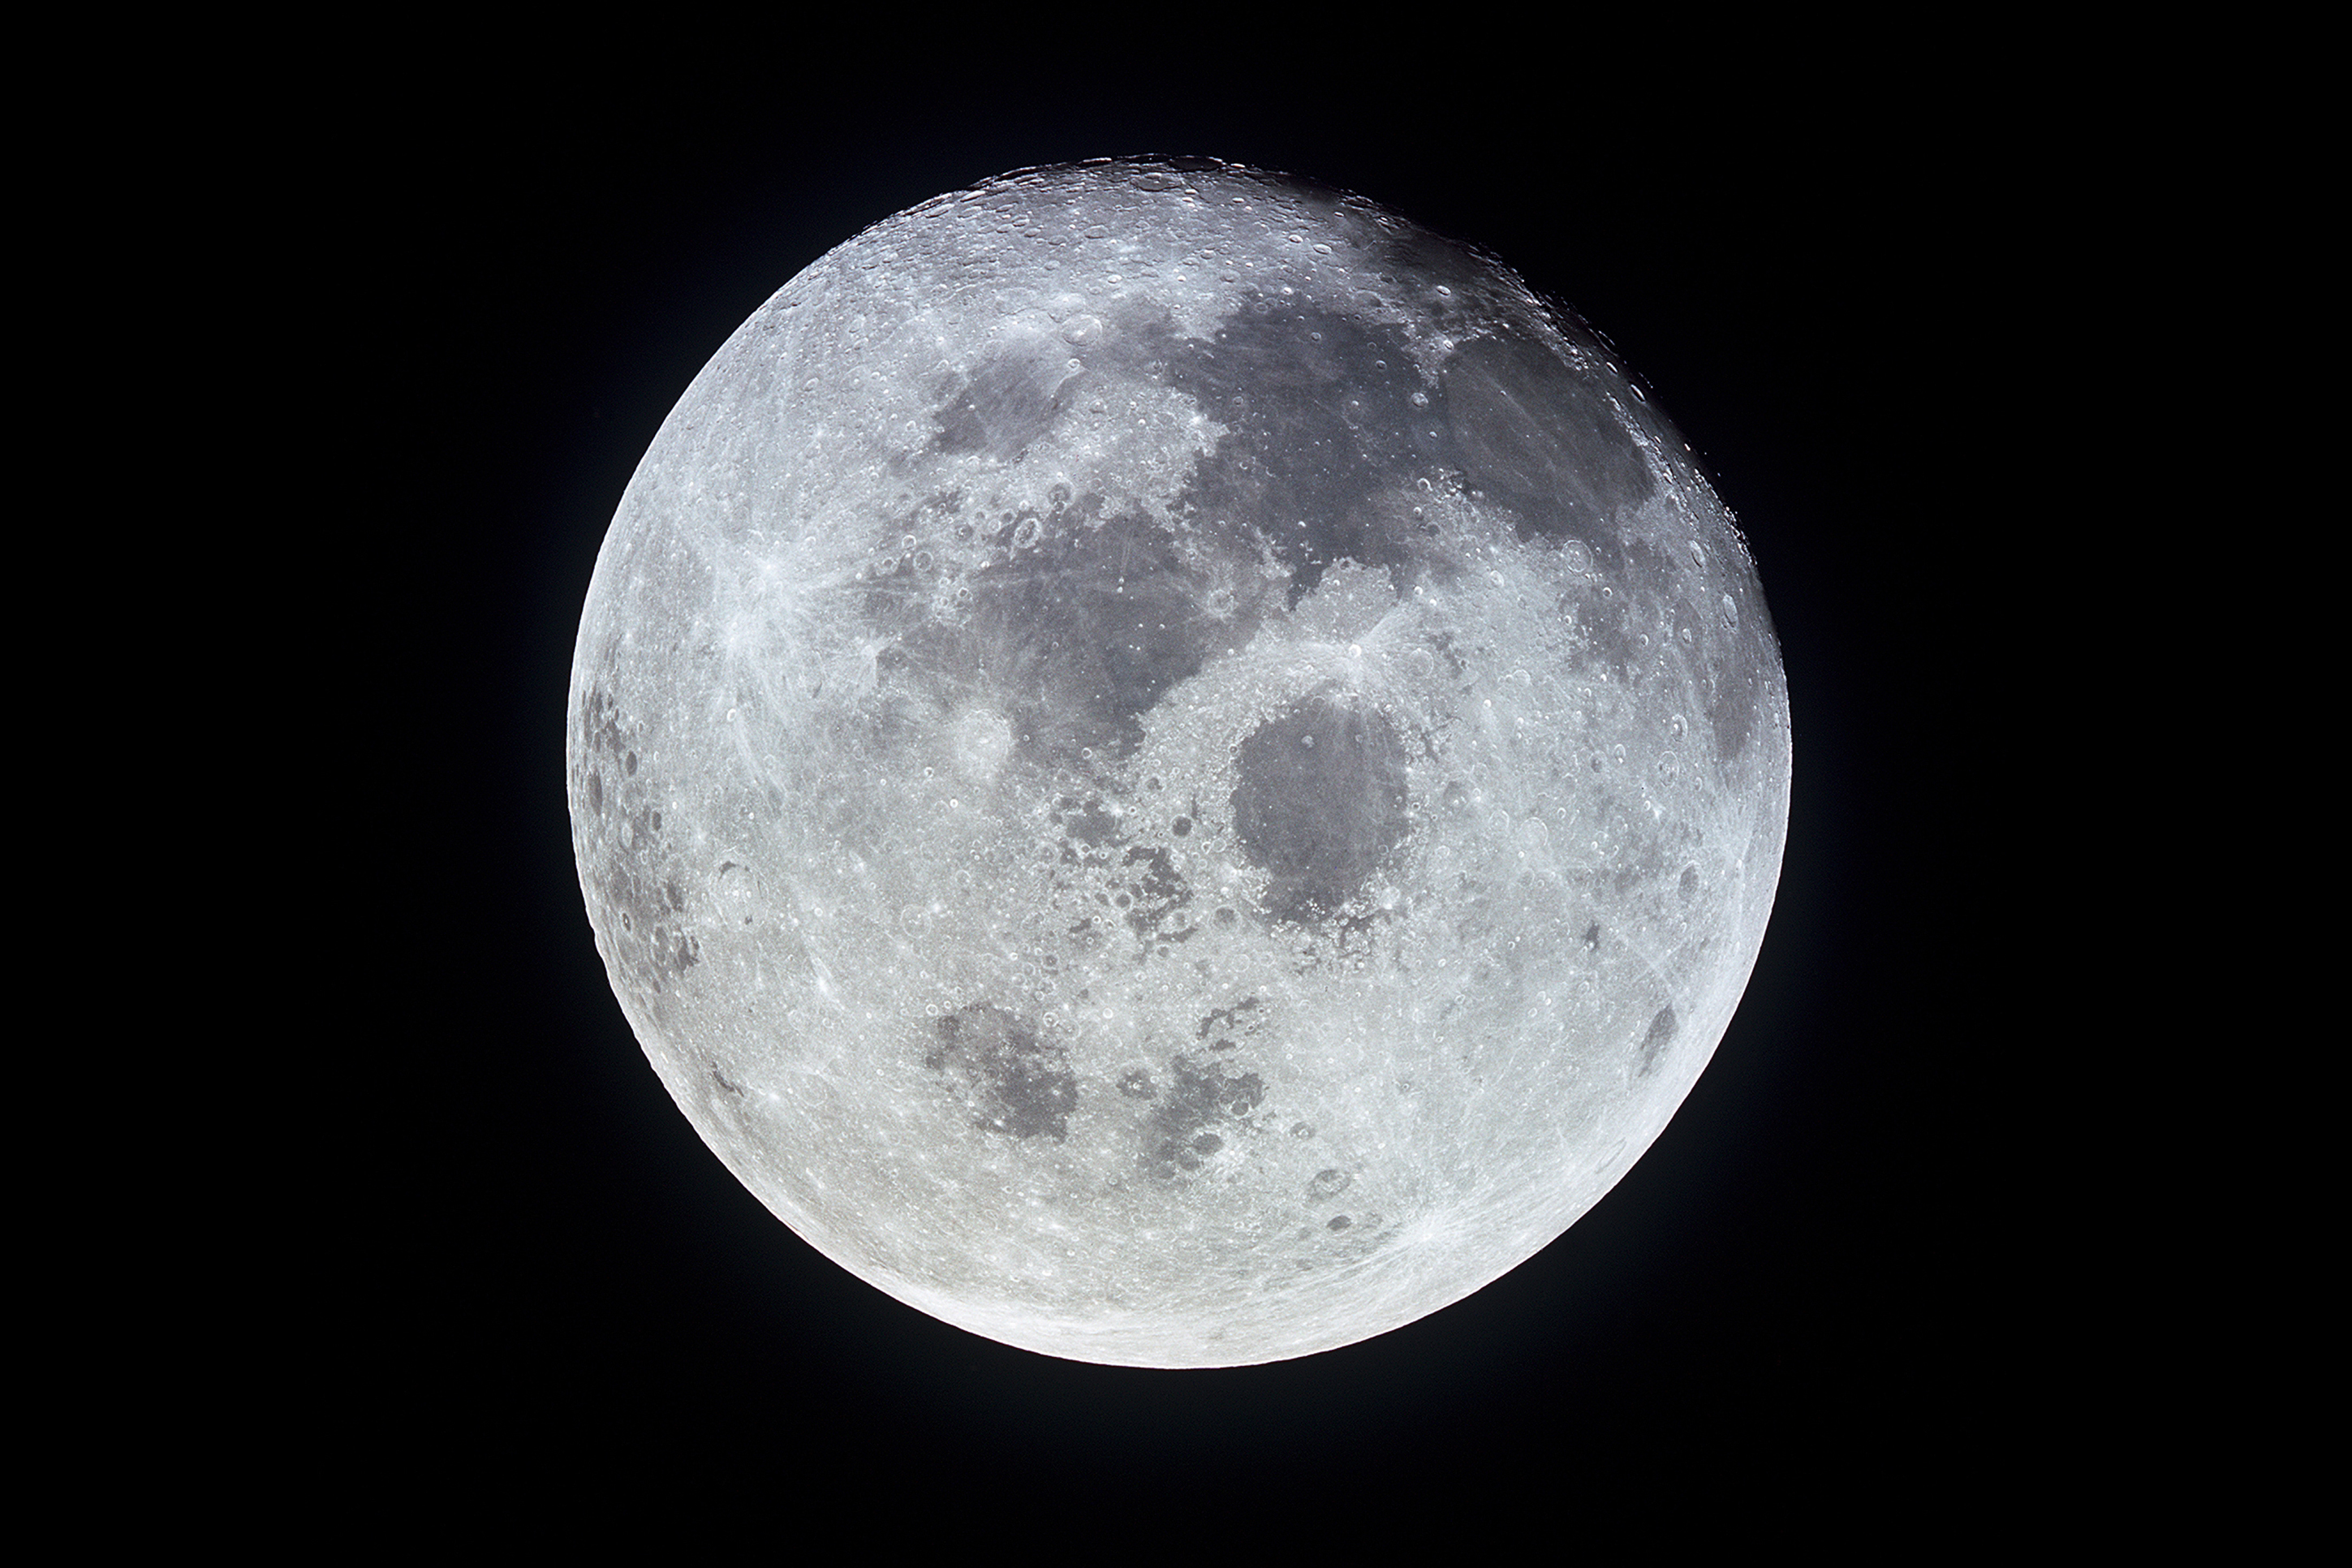 View of the full moon photographed from the Apollo 11 spacecraft during its trans-Earth journey homeward.